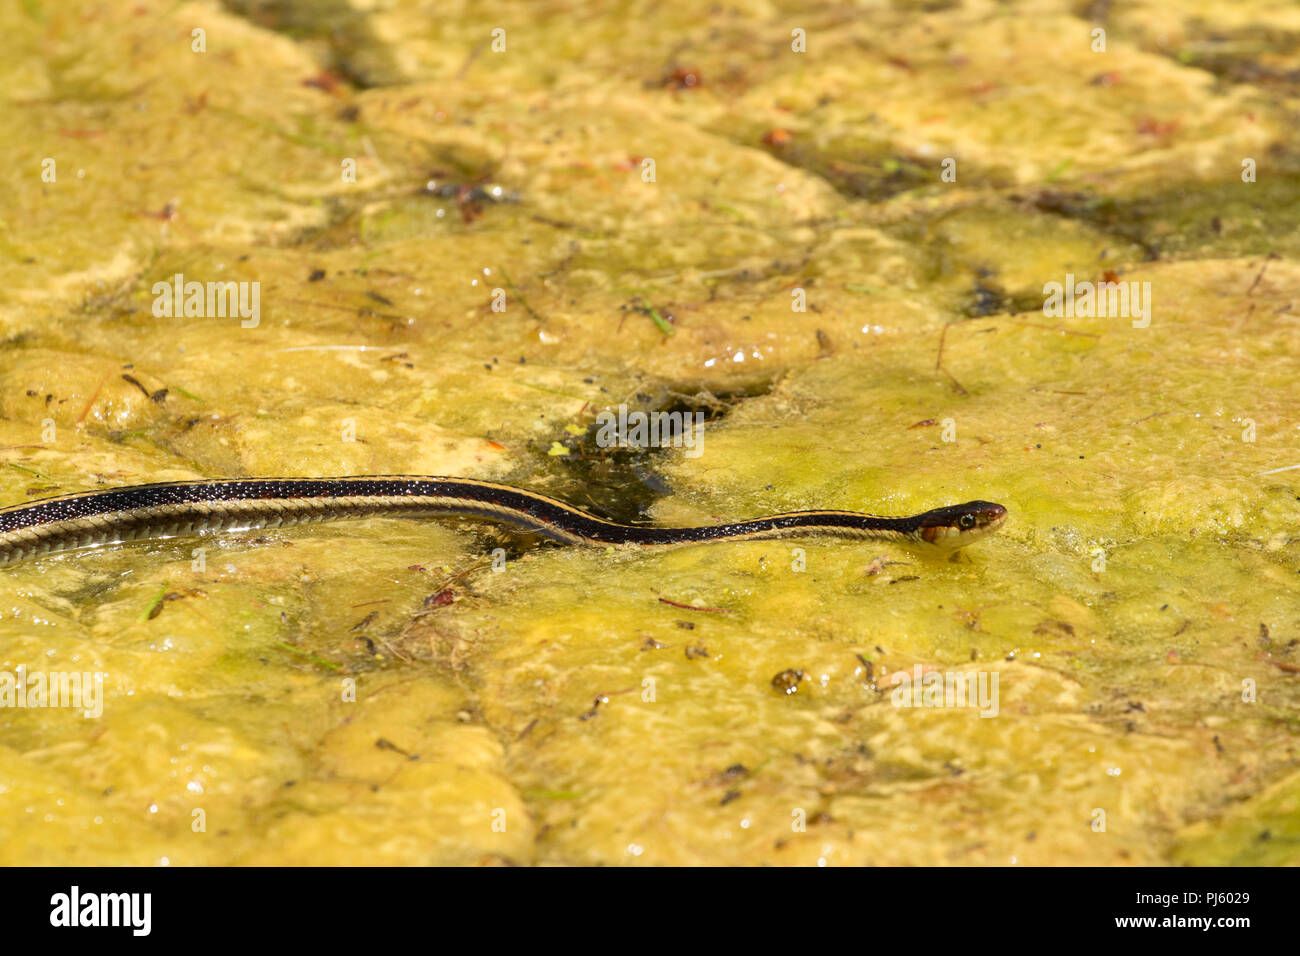 Garter snake sulle alghe in laguna blu sul fiume Deschutes, Deschutes National Forest, Cascade Lakes National Scenic Byway, Oregon Foto Stock